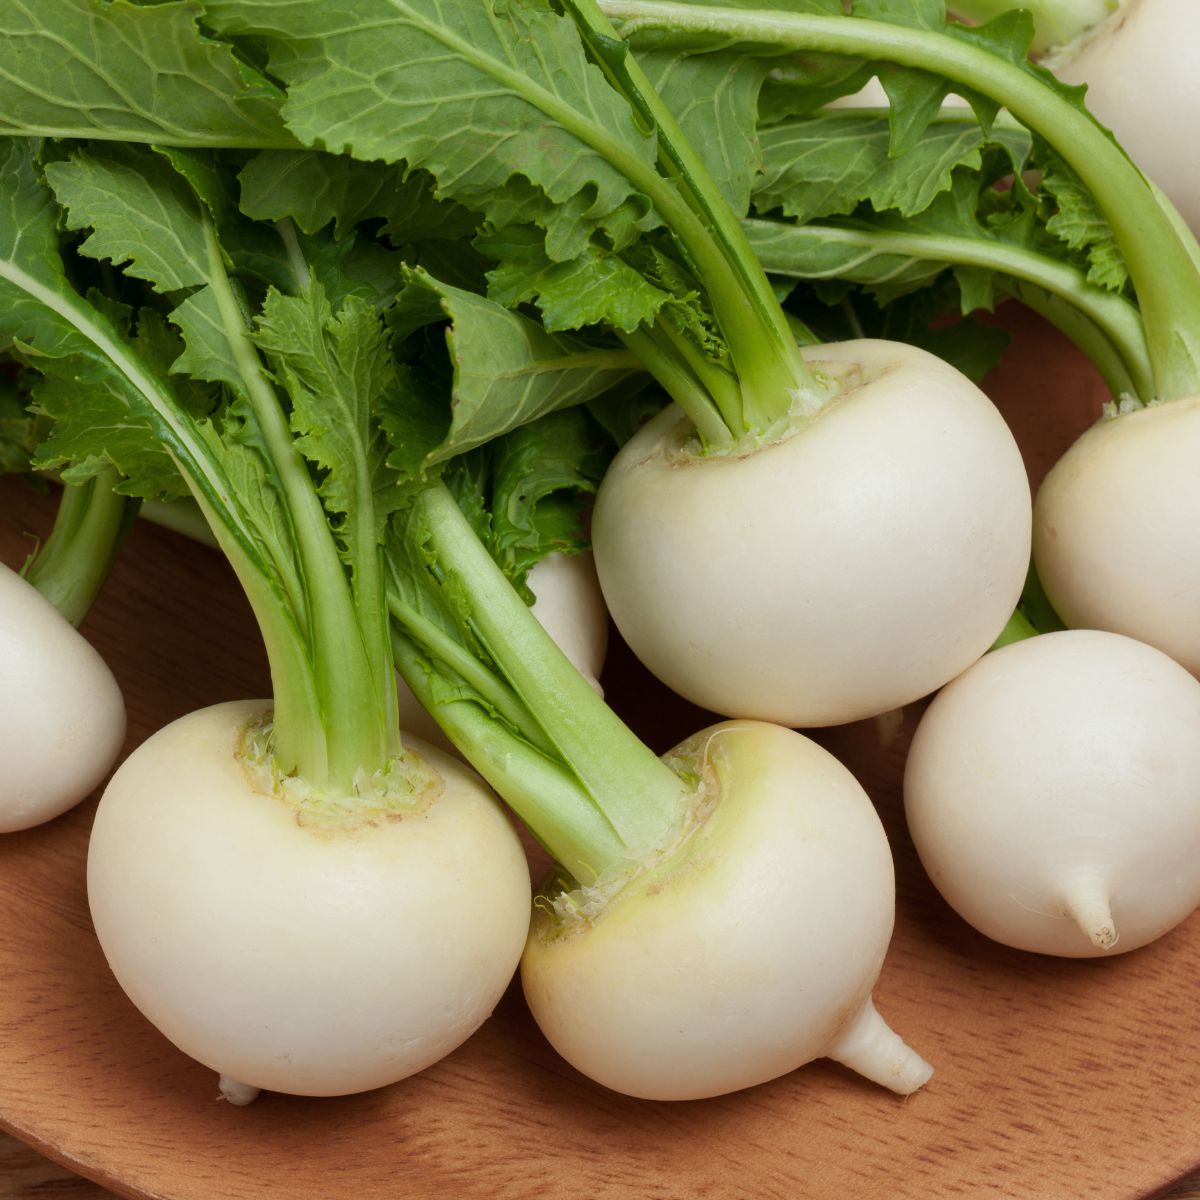 A plate of radishes on a wooden table with turnips.